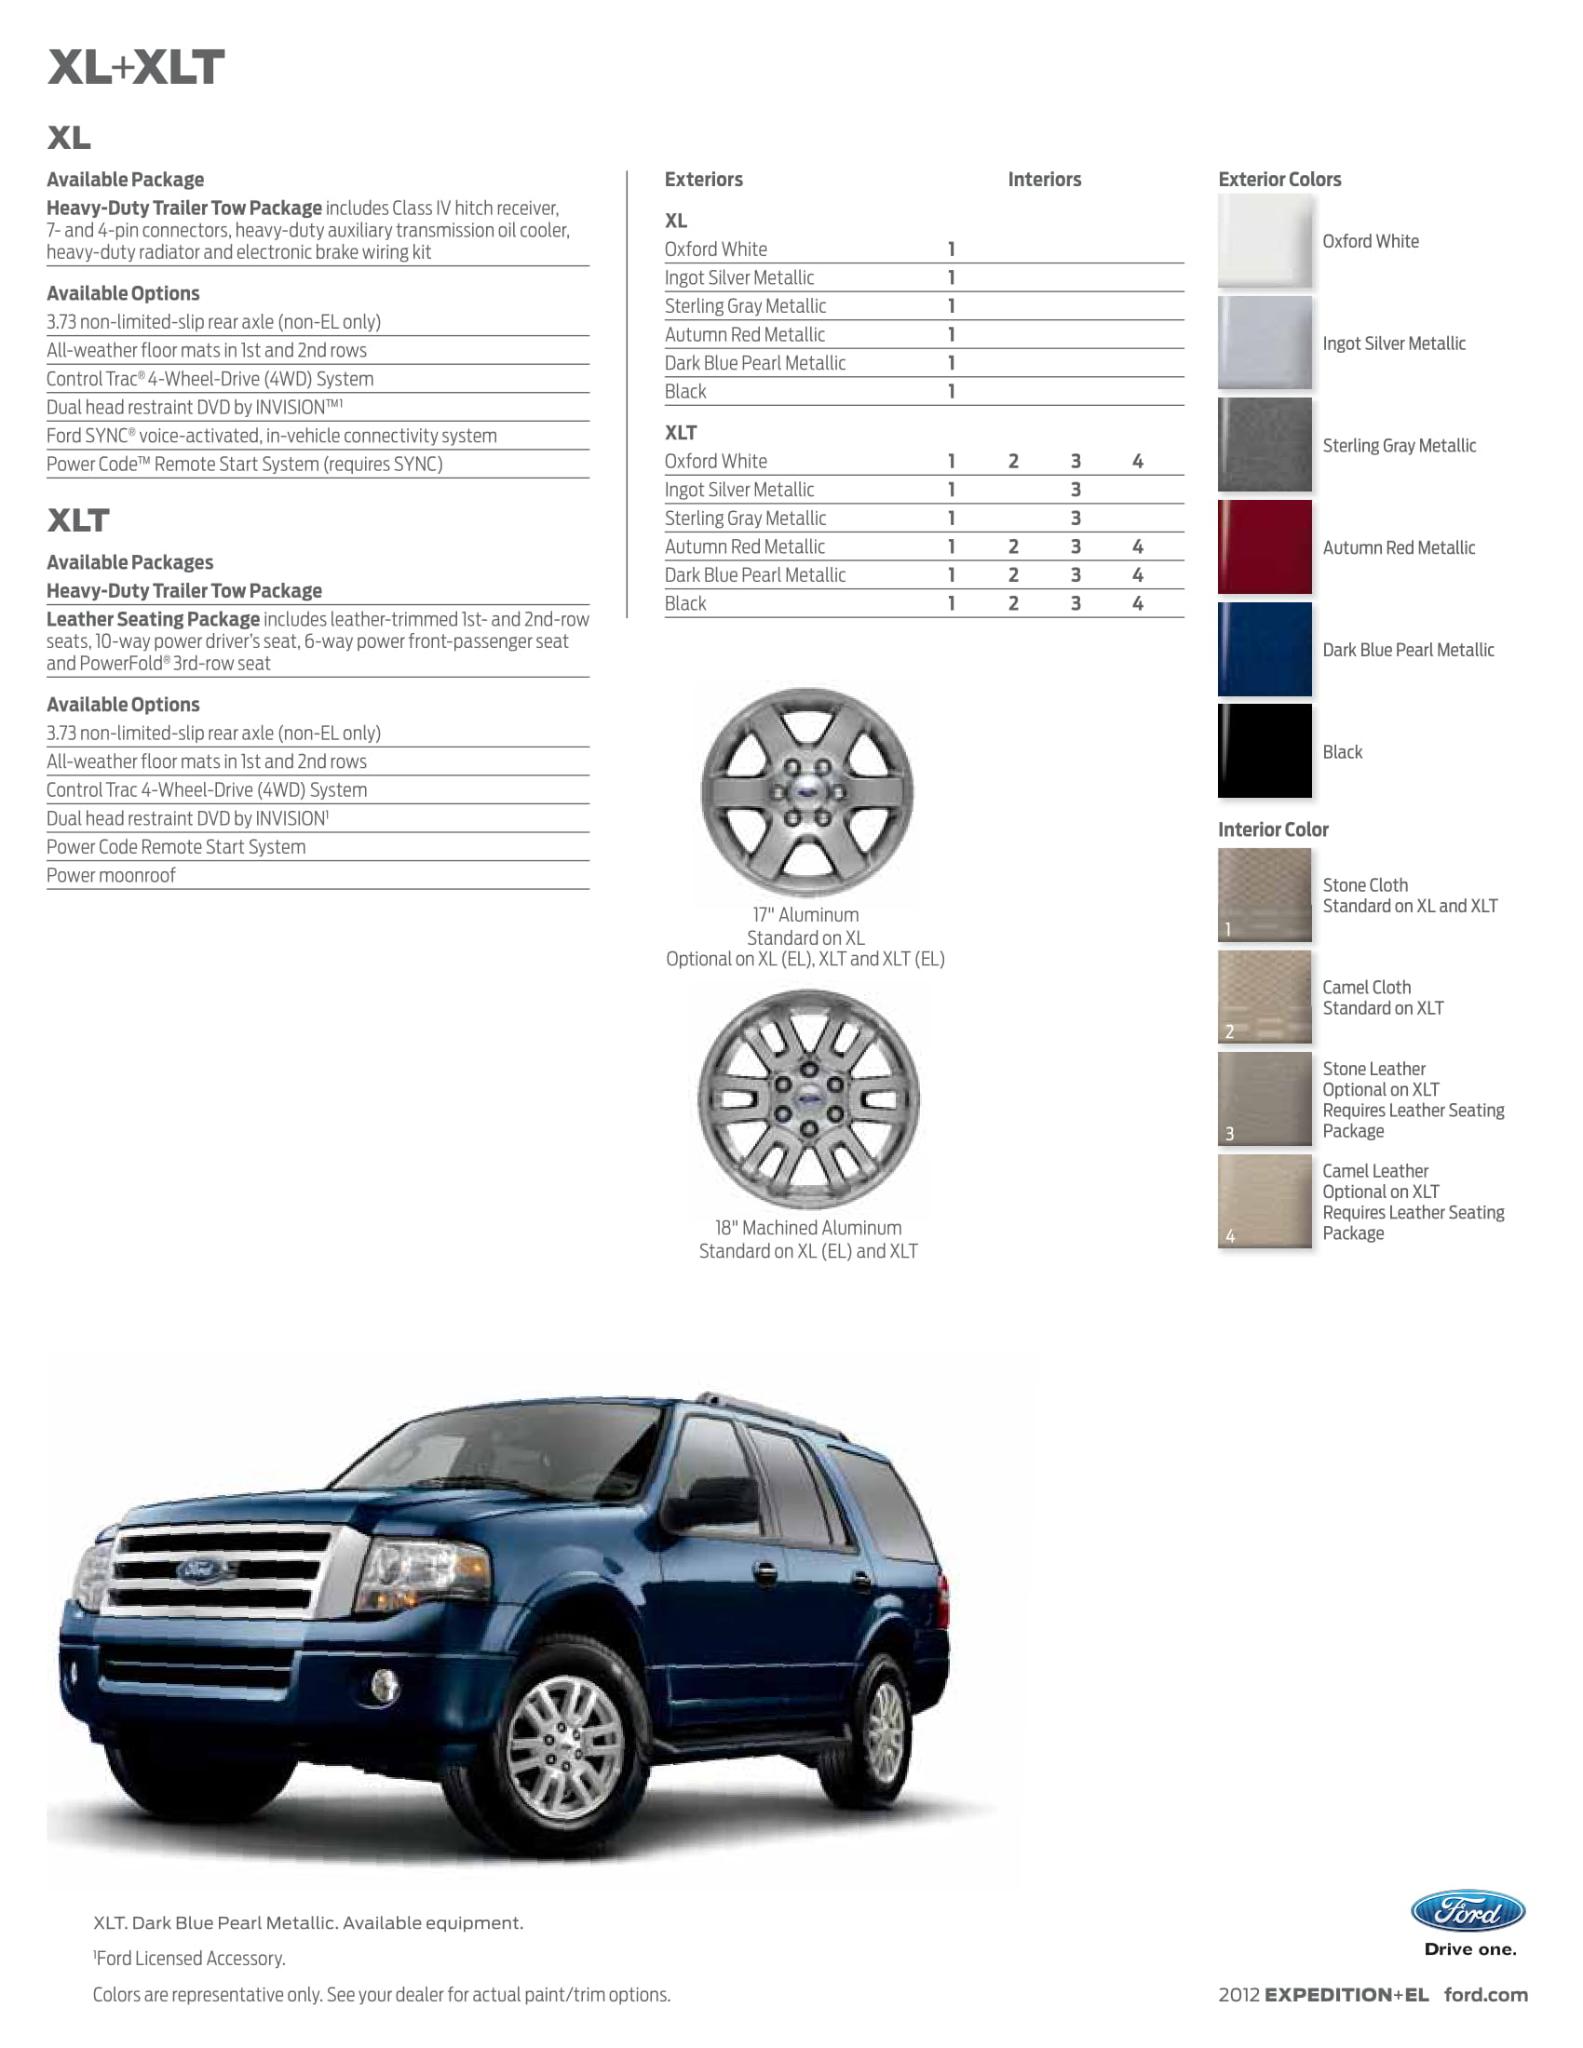 2004 ford excursion paint codes